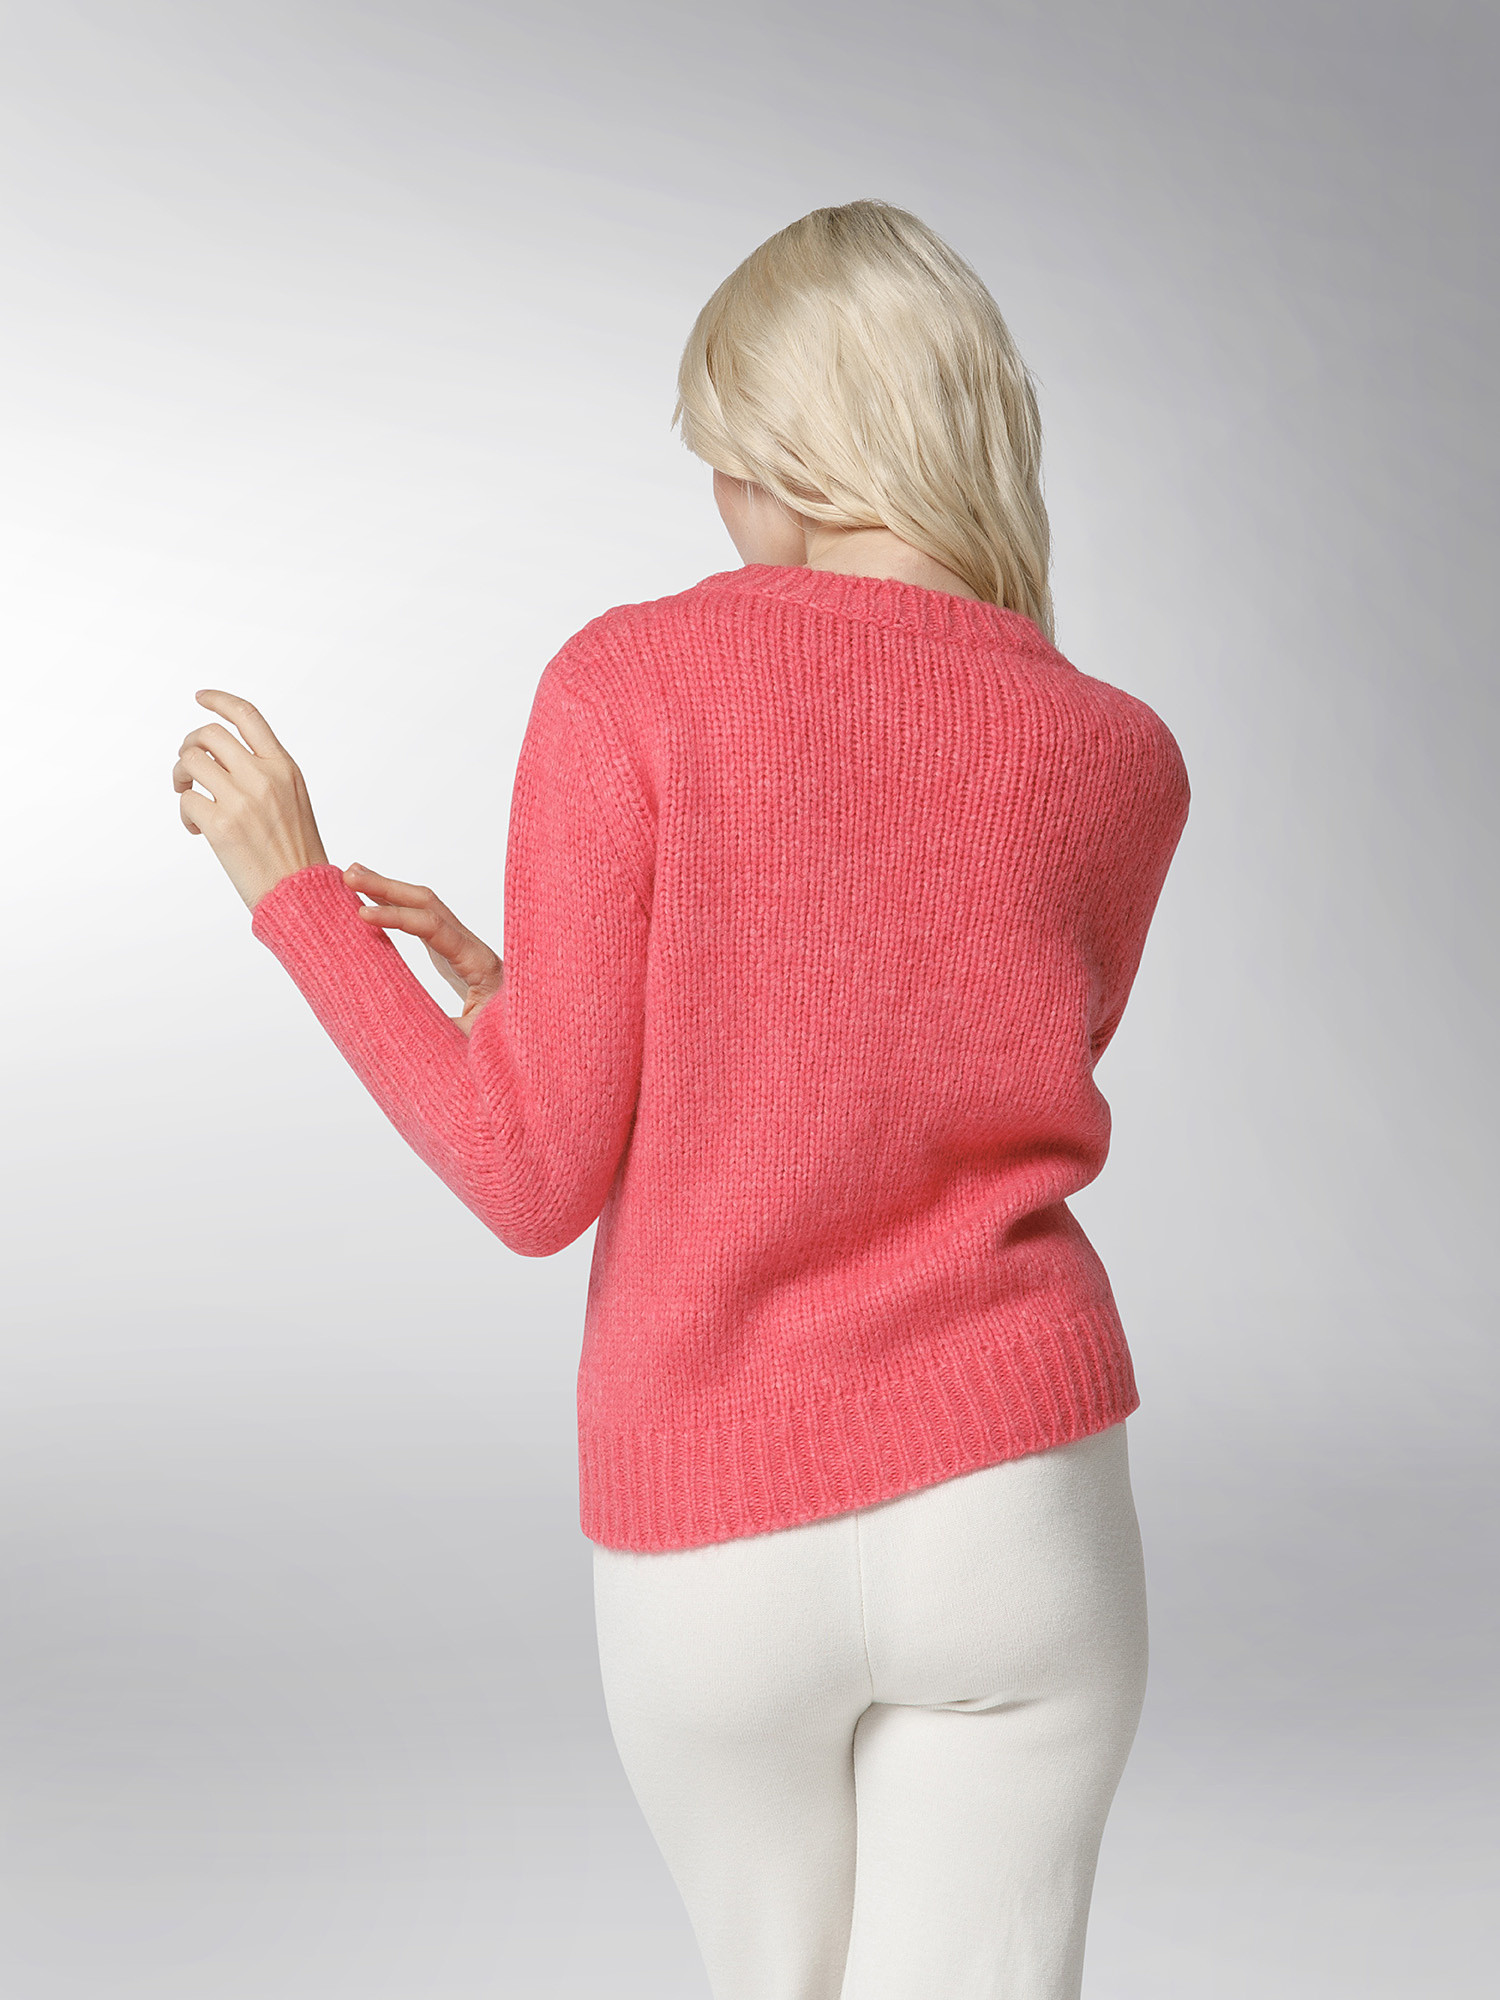 K Collection - Crewneck sweater, Pink Fuchsia, large image number 5